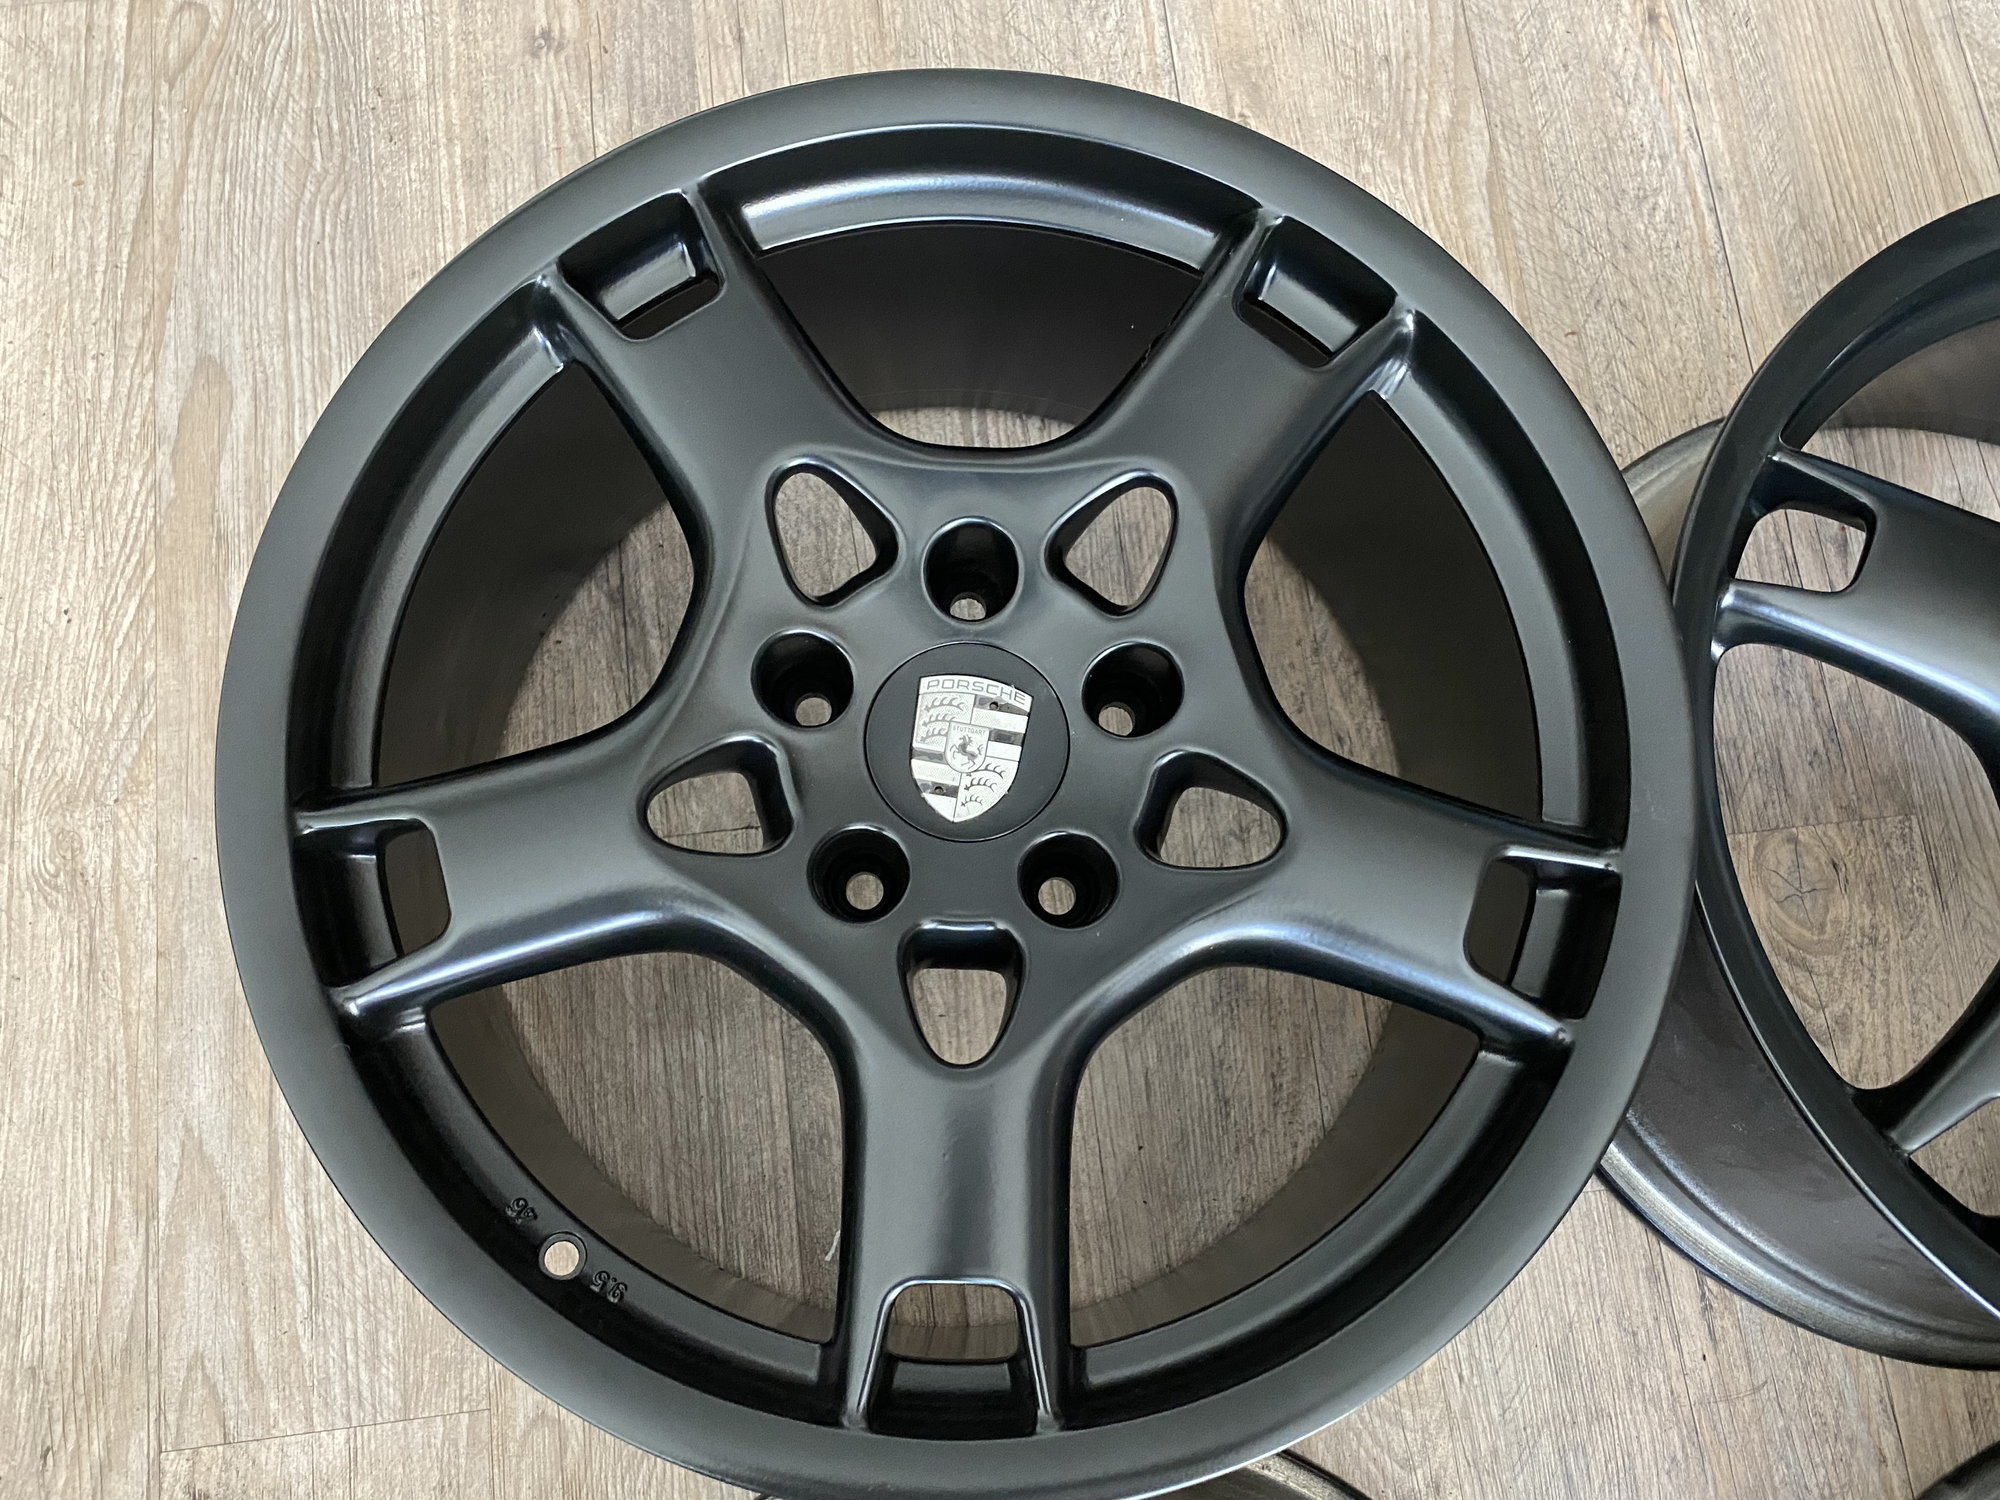 Wheels and Tires/Axles - Porsche 987/997 Black OEM Lobster Claw Wheels Set of 4 19" Satin Black - Used - 0  All Models - Dallas, TX 75231, United States